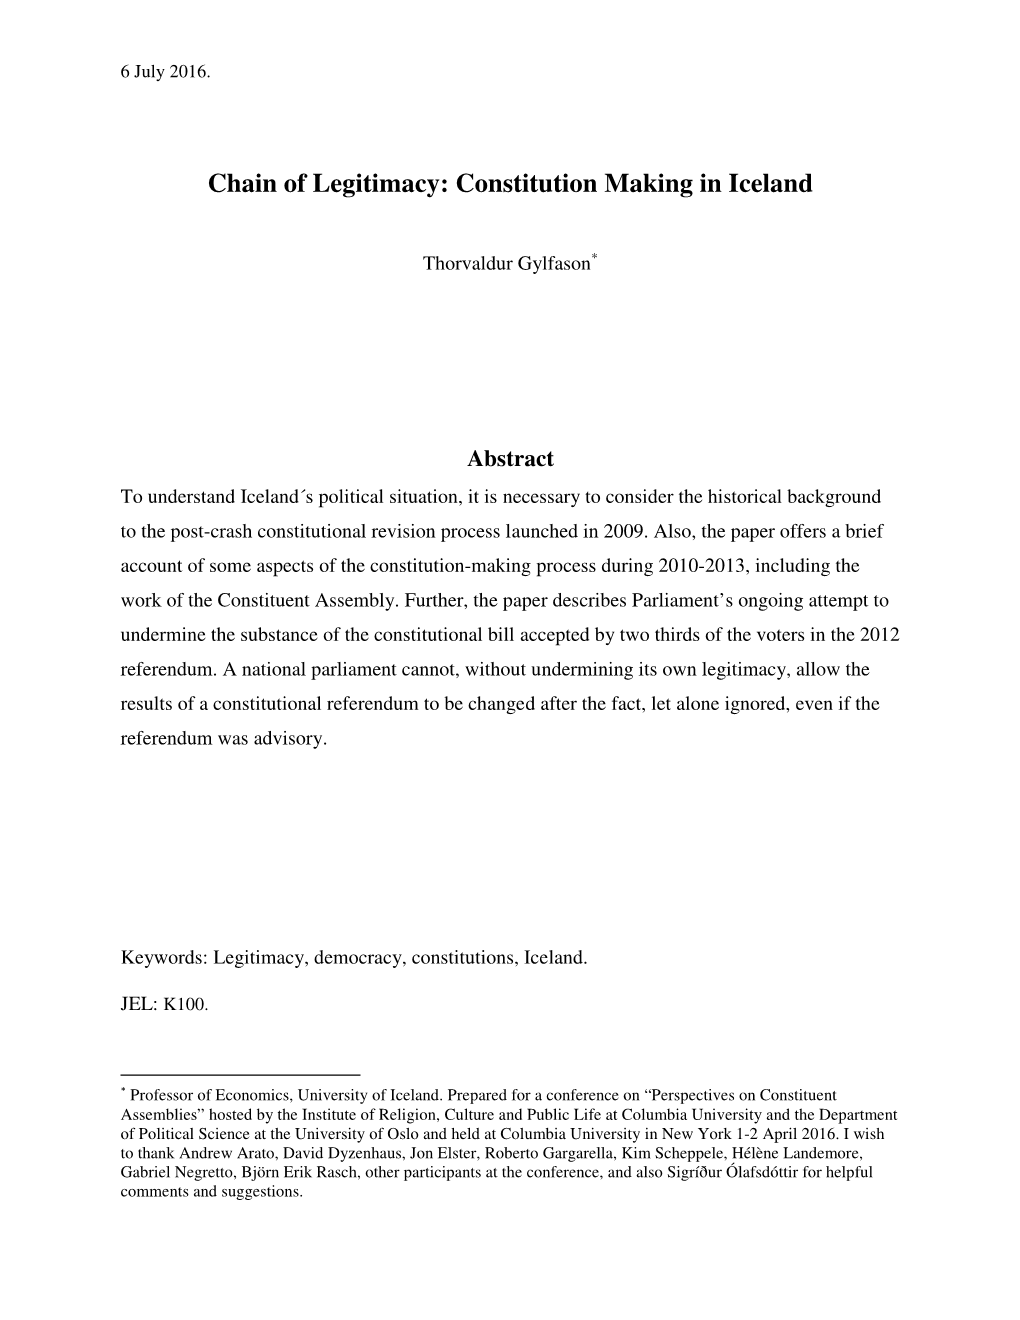 Chain of Legitimacy: Constitution Making in Iceland